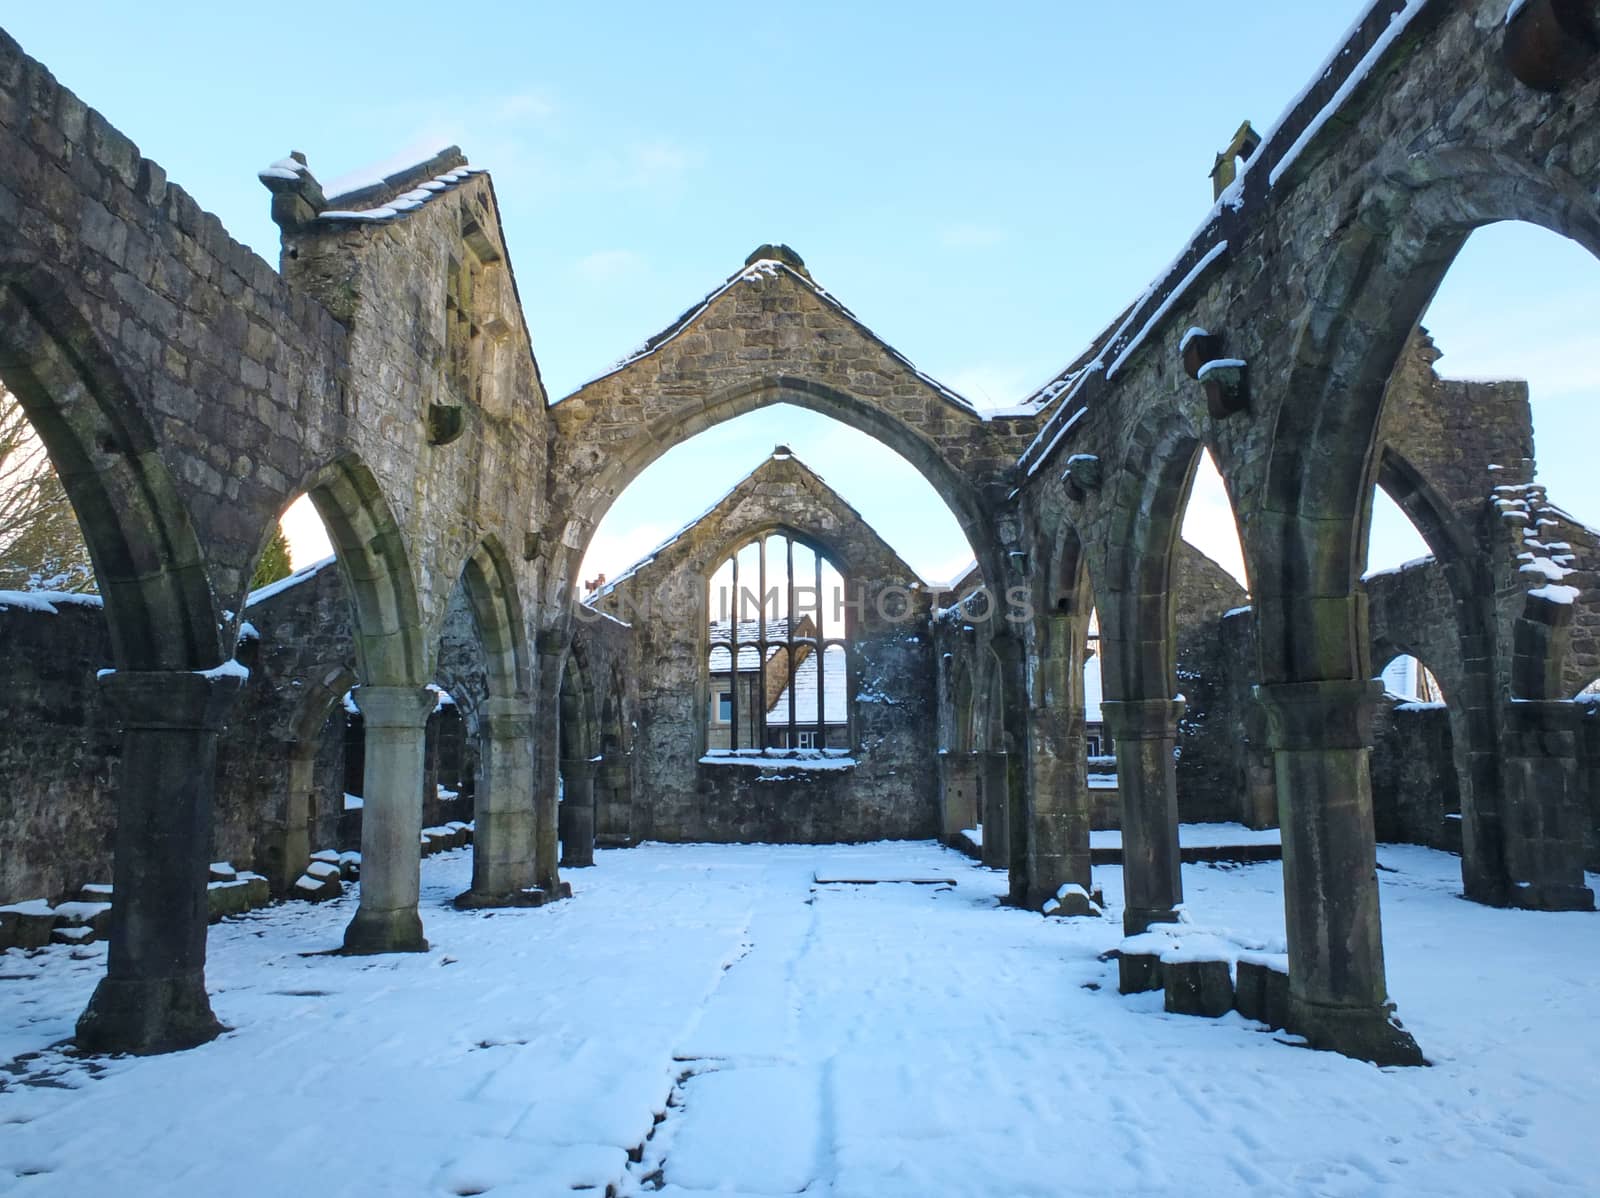 the medieval ruined church in heptonstall covered in snow showing arches and columns against a blue winter sky